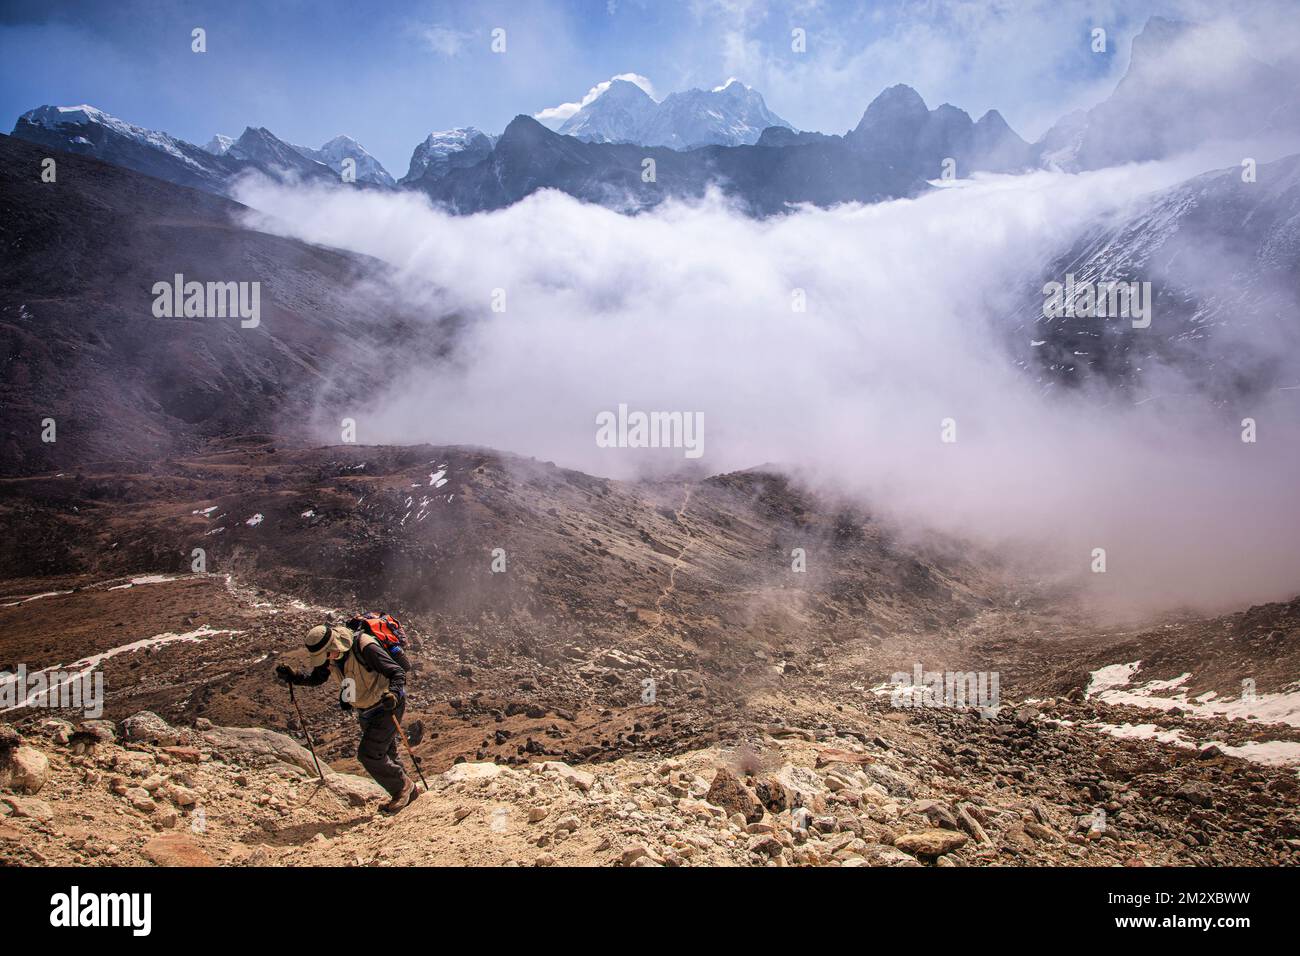 Climbing to Renjo La (pass) at 18,000 feet as clouds cover Gokyo Lake, but allowing distant views of Mount Everest, Nuptse and Lhotse. Stock Photo